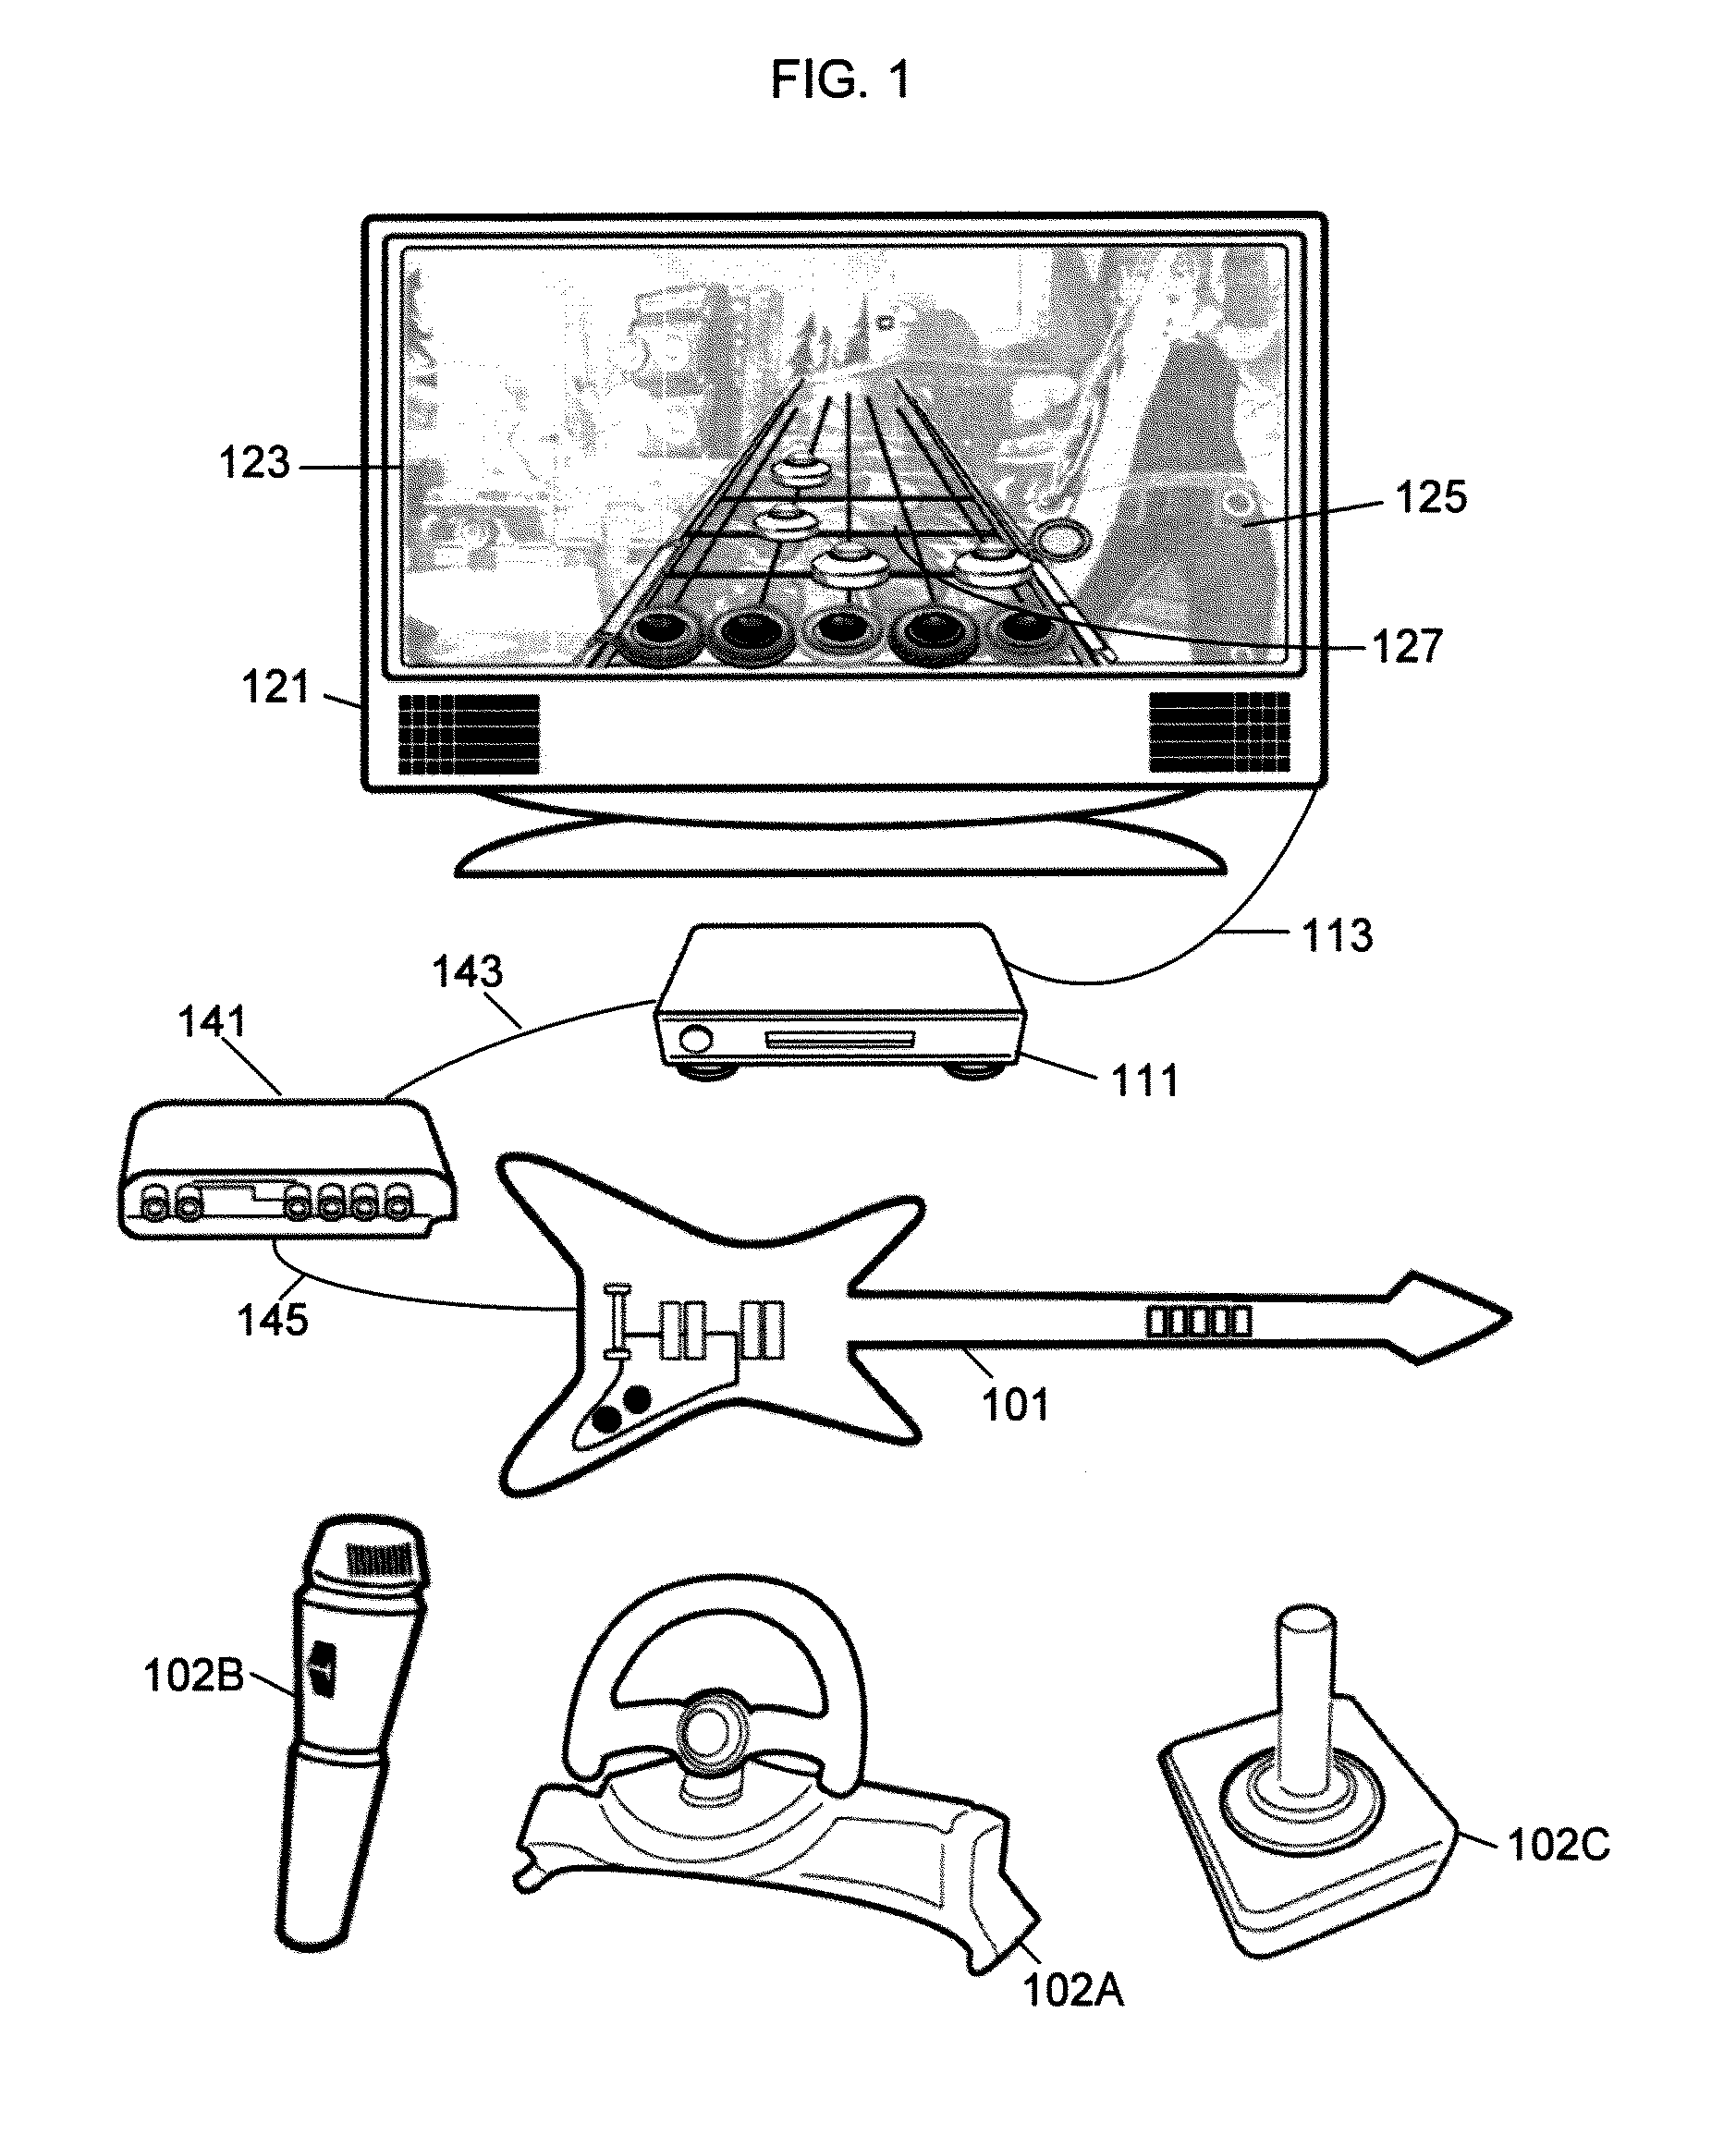 Music game software and input device utilizing a video player